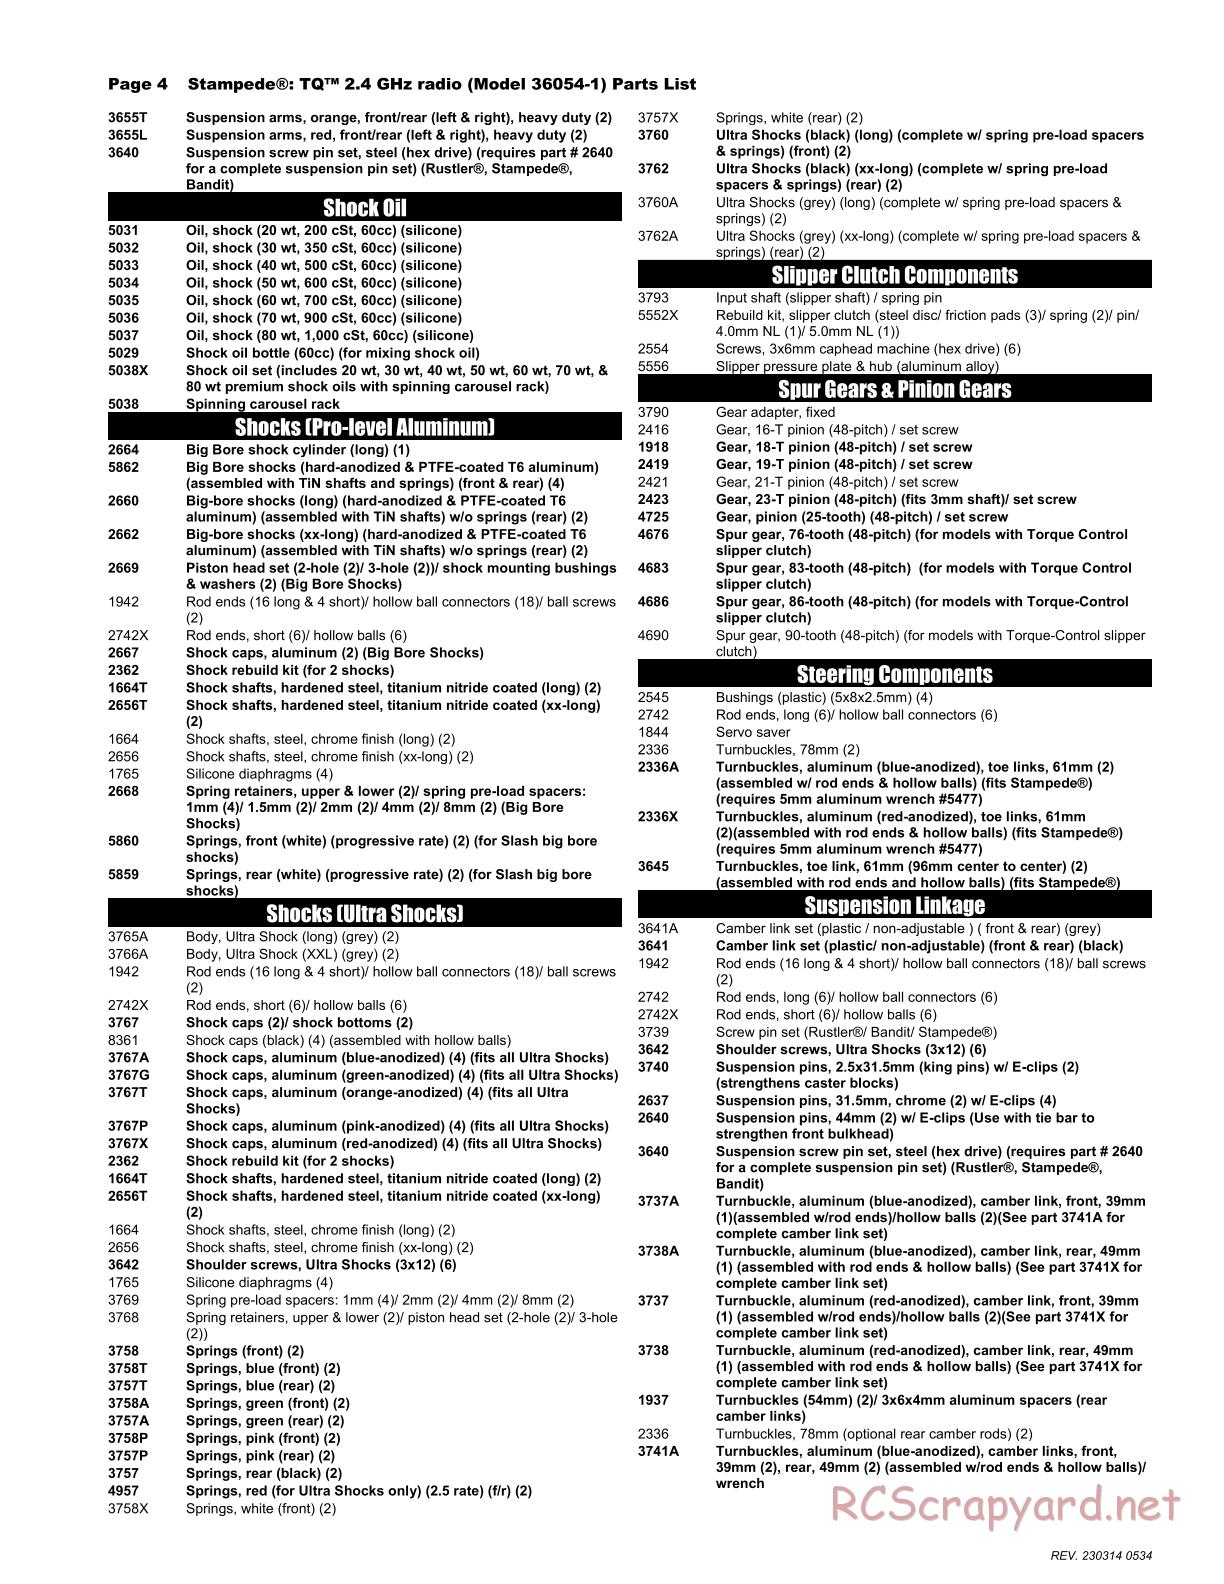 Traxxas - Stampede XL-5 (2015) - Parts List - Page 4